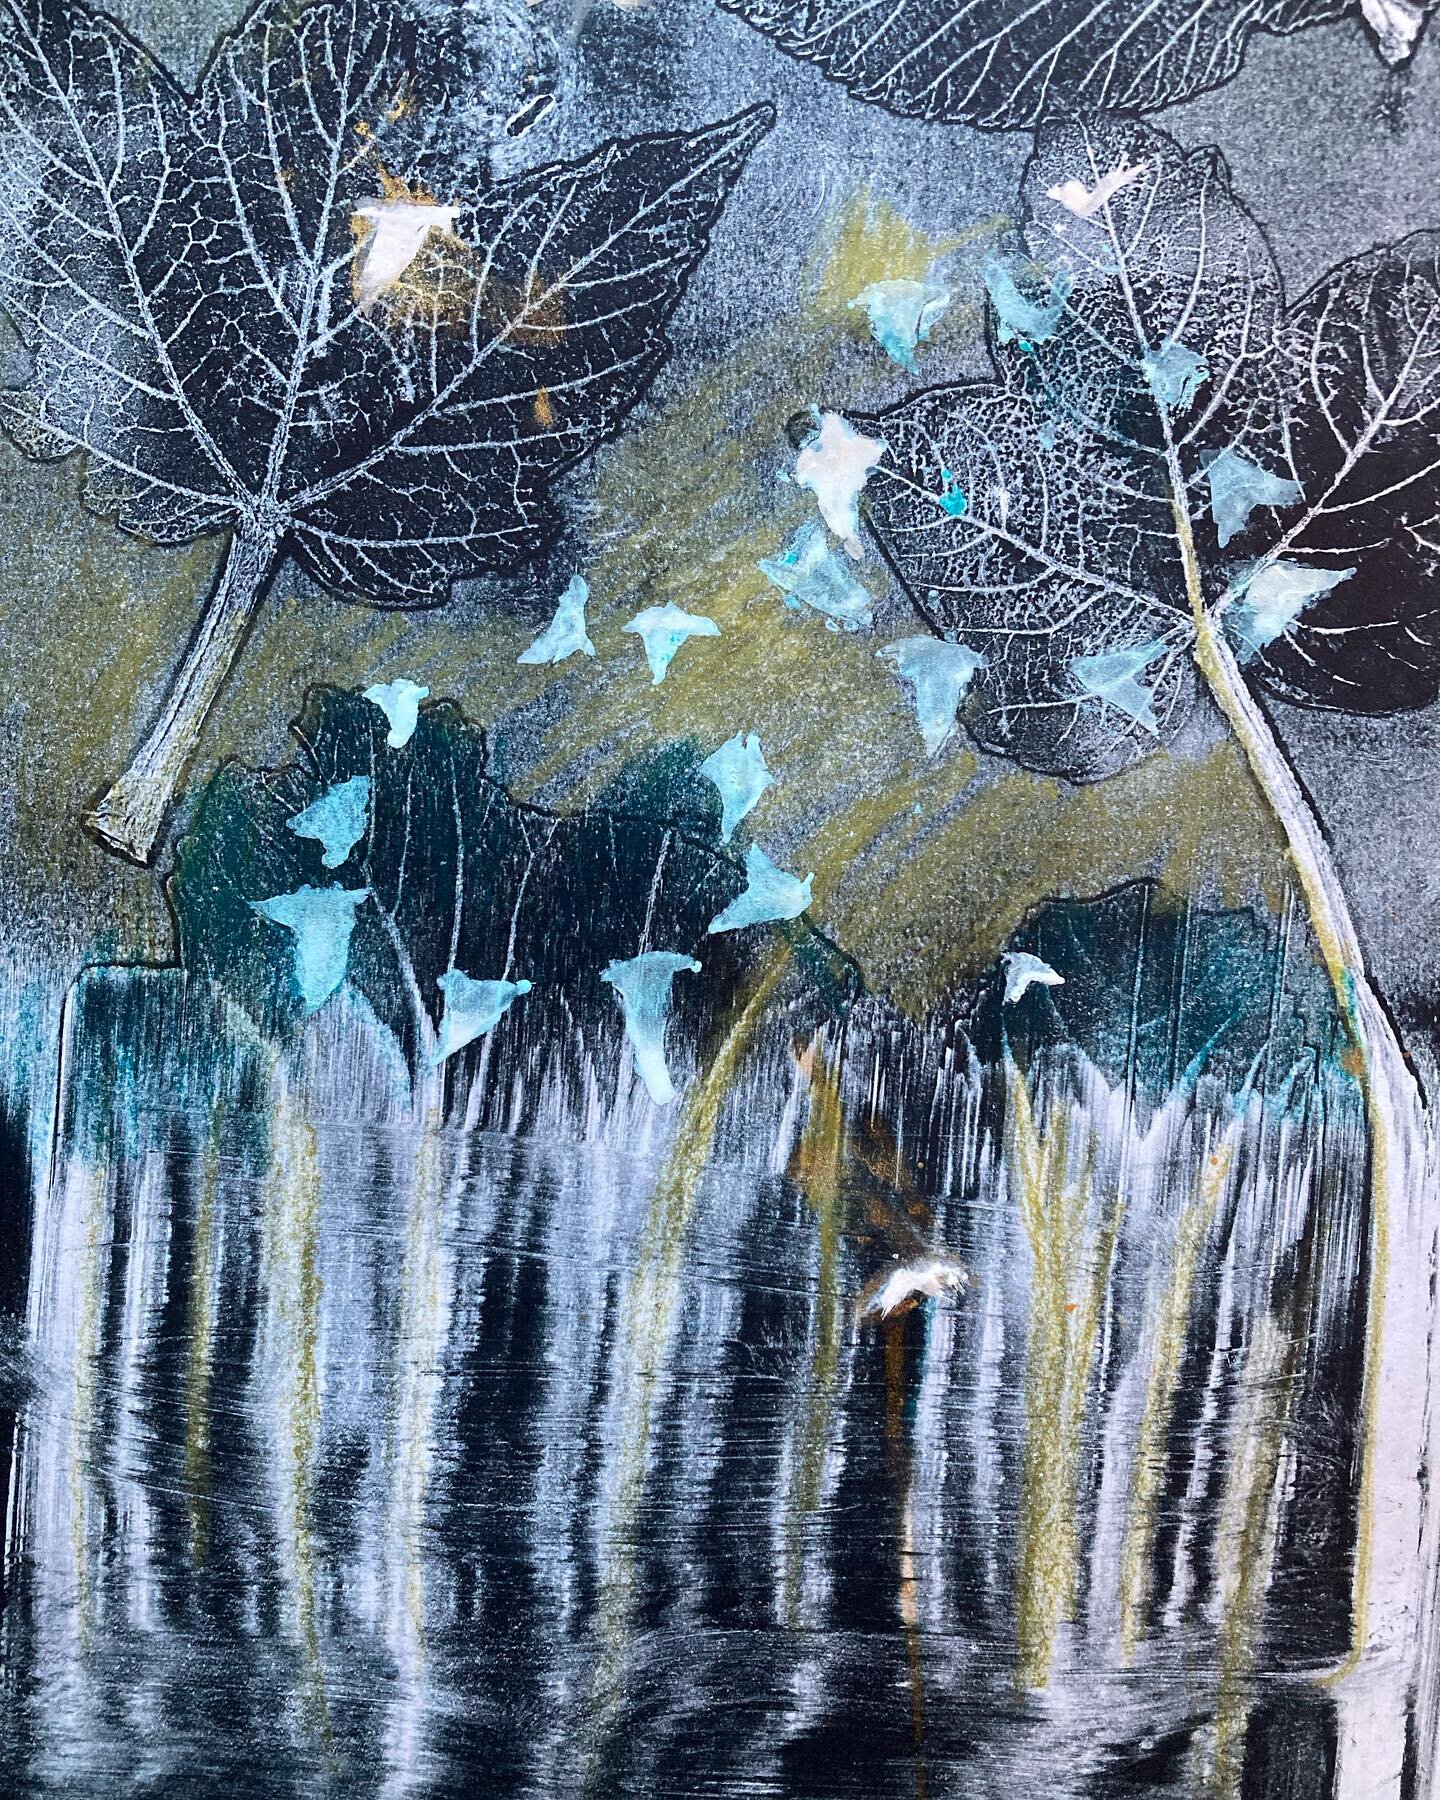 Week four of @printersolstice &hellip; cool colours. This one is a multilayered monoprint with stencils. Must admit I&rsquo;m a cool colour kind of person so loved this palette 💙💚⭐️ of wintery colours&hellip;
⠀⠀⠀⠀⠀⠀⠀⠀⠀
Loving this challenge 😊 #pri